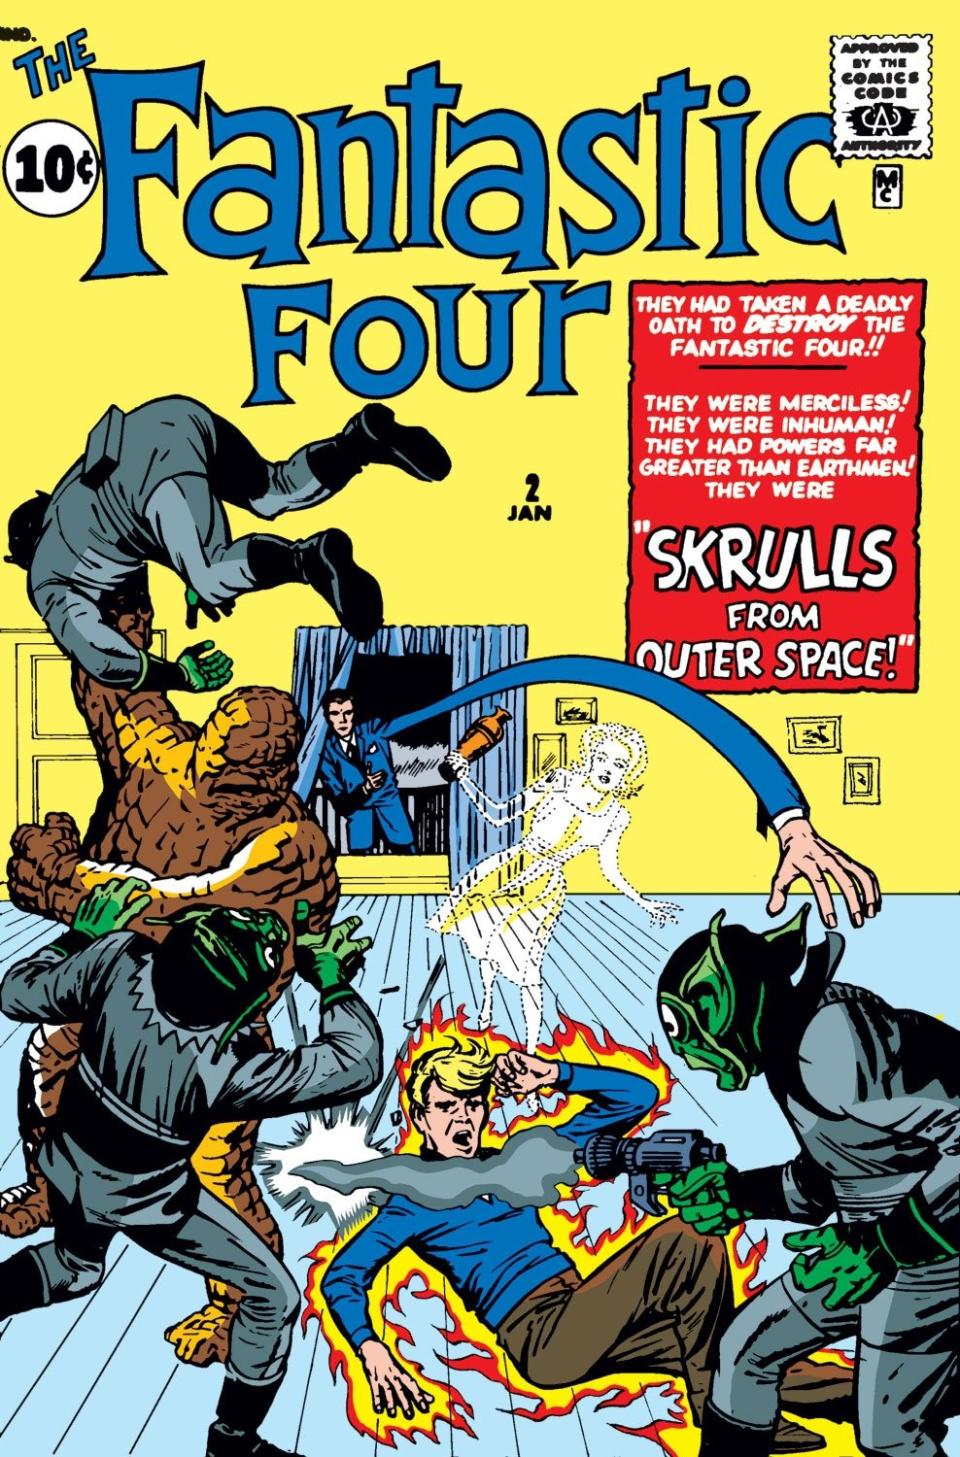 Covert art by Jack Kirby for issue #2 of The Fantastic Four shows three green alien Skrulls fighting the Thing, Mr. Fantastic, and the Invisible Girl, while the Human Torch sits on the floor, stunned.